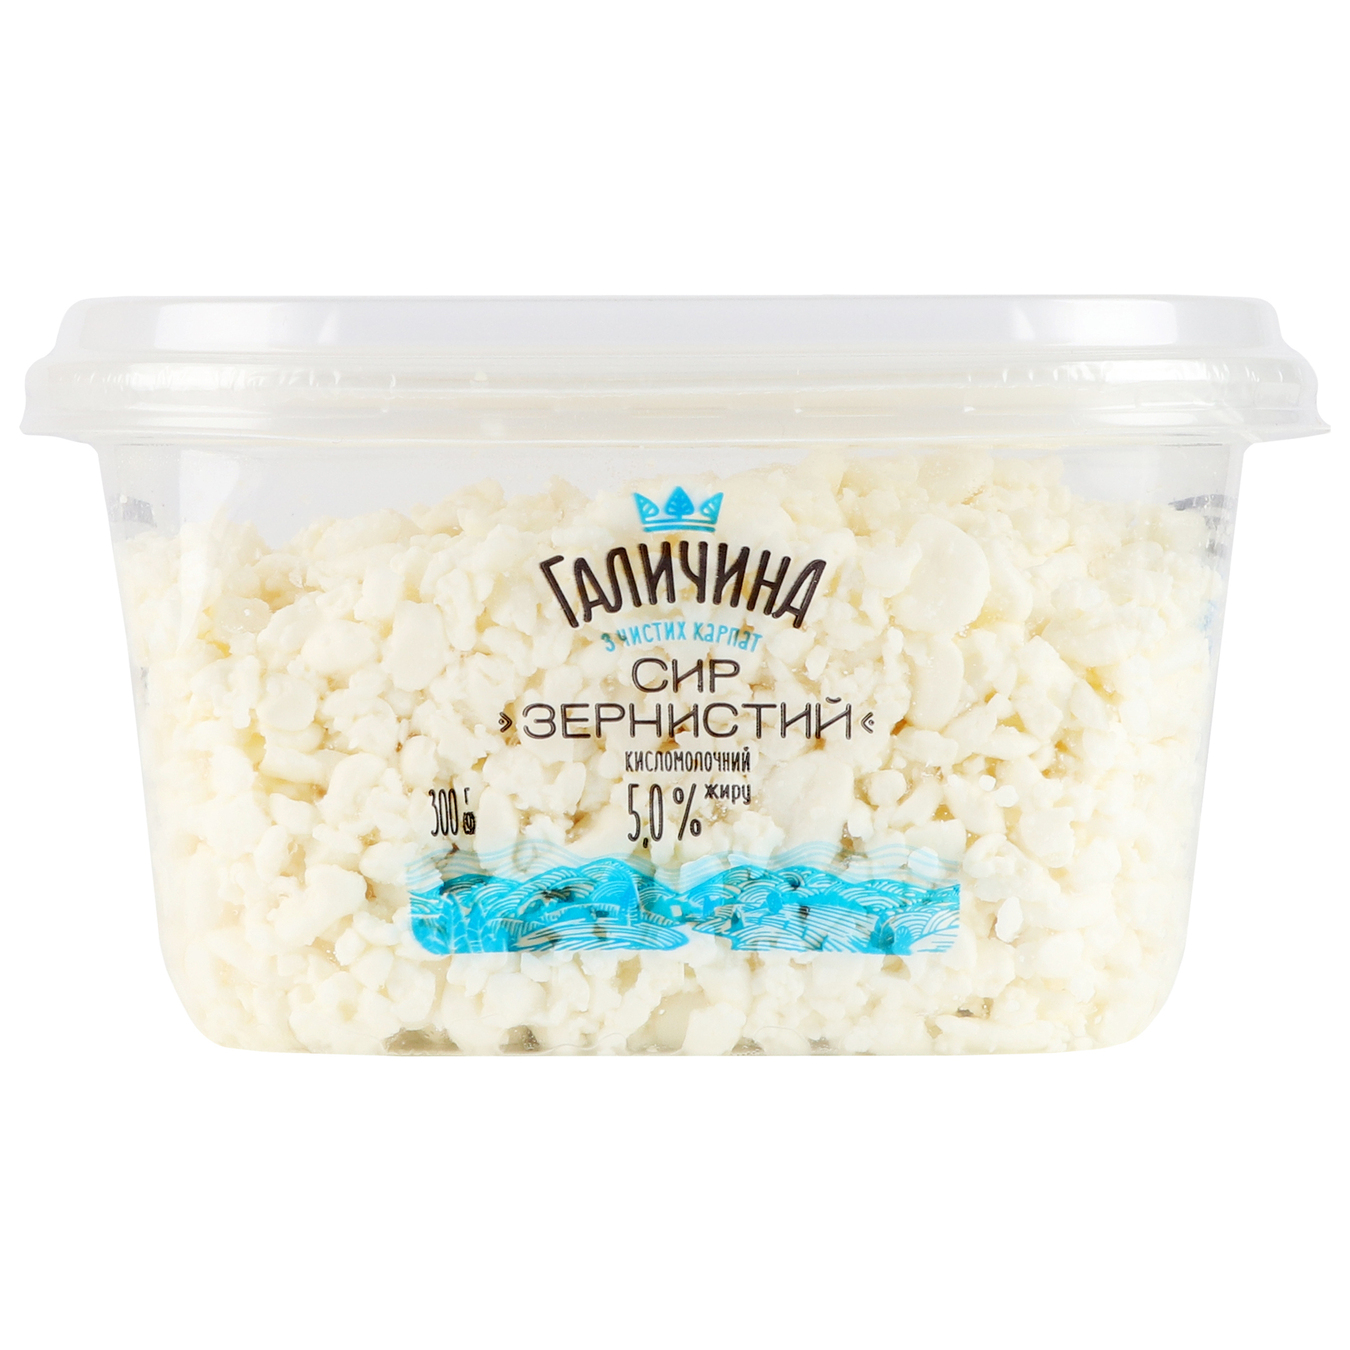 Halychyna cottage cheese in a tray 5% 300g